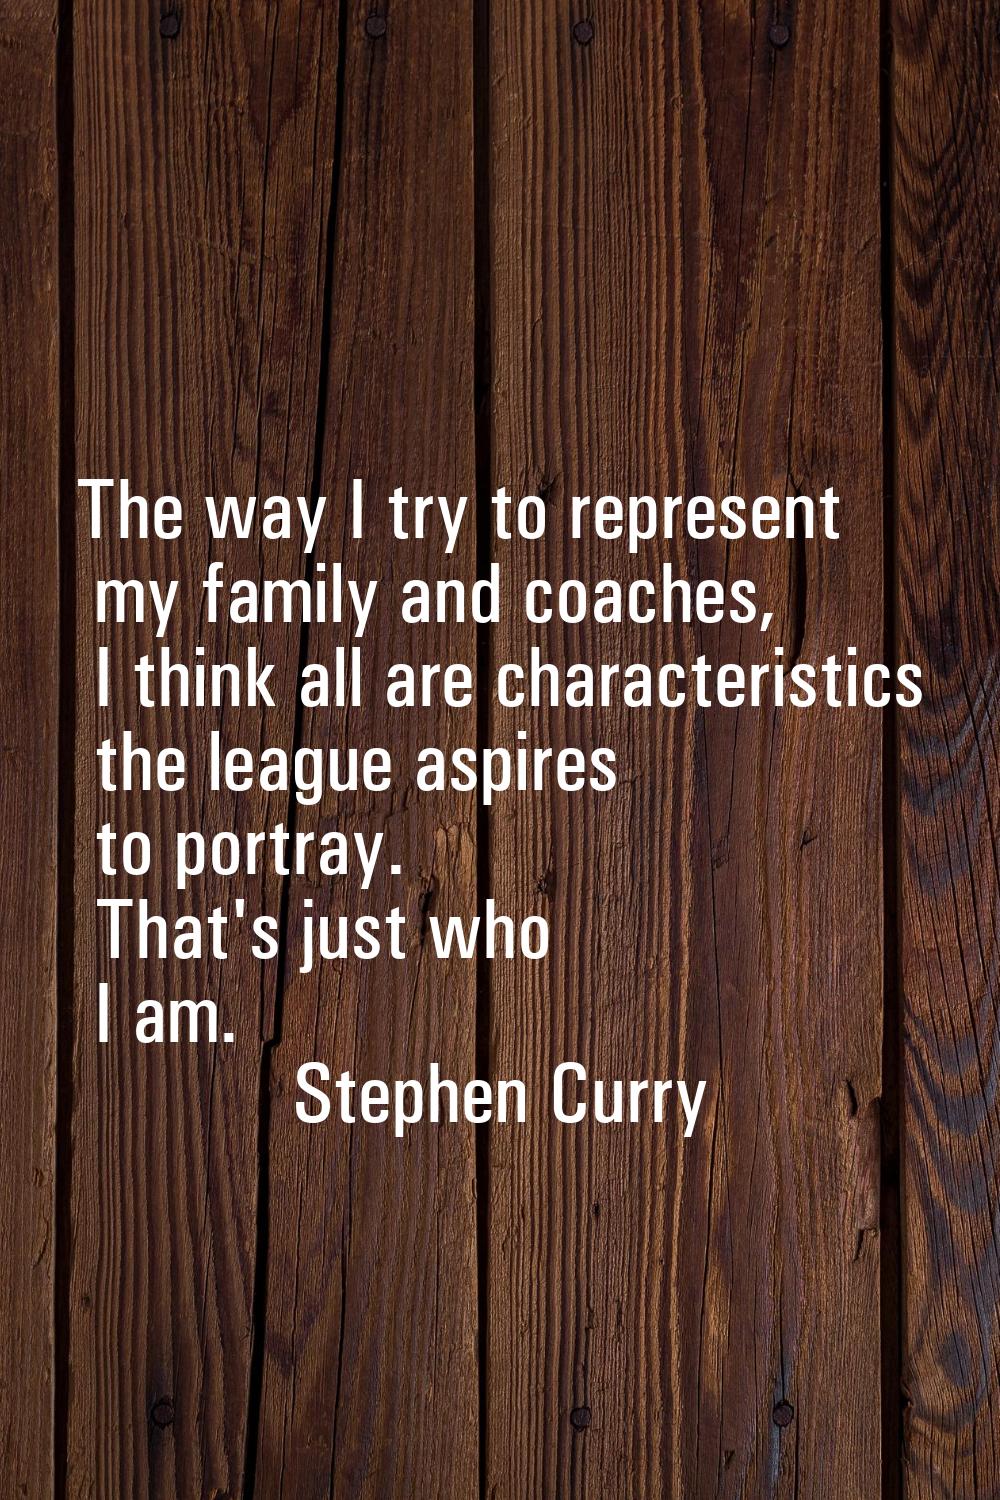 The way I try to represent my family and coaches, I think all are characteristics the league aspire